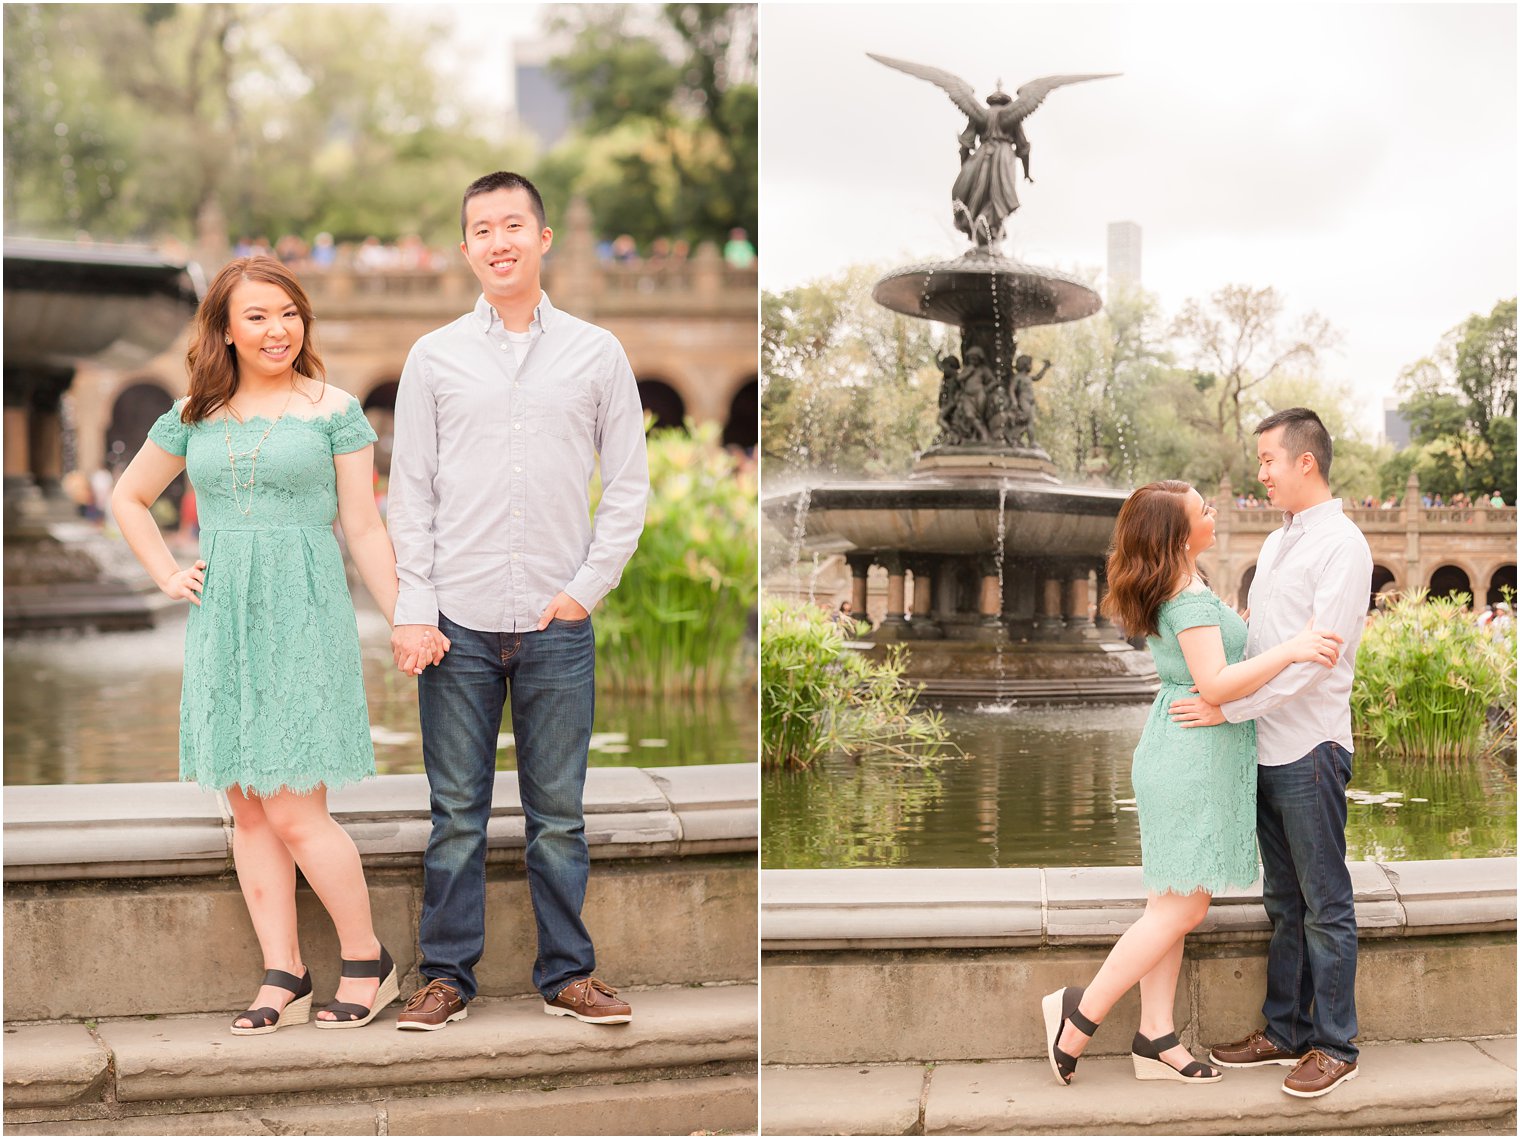 Fall engagement photos in Central Park by Idalia Photography